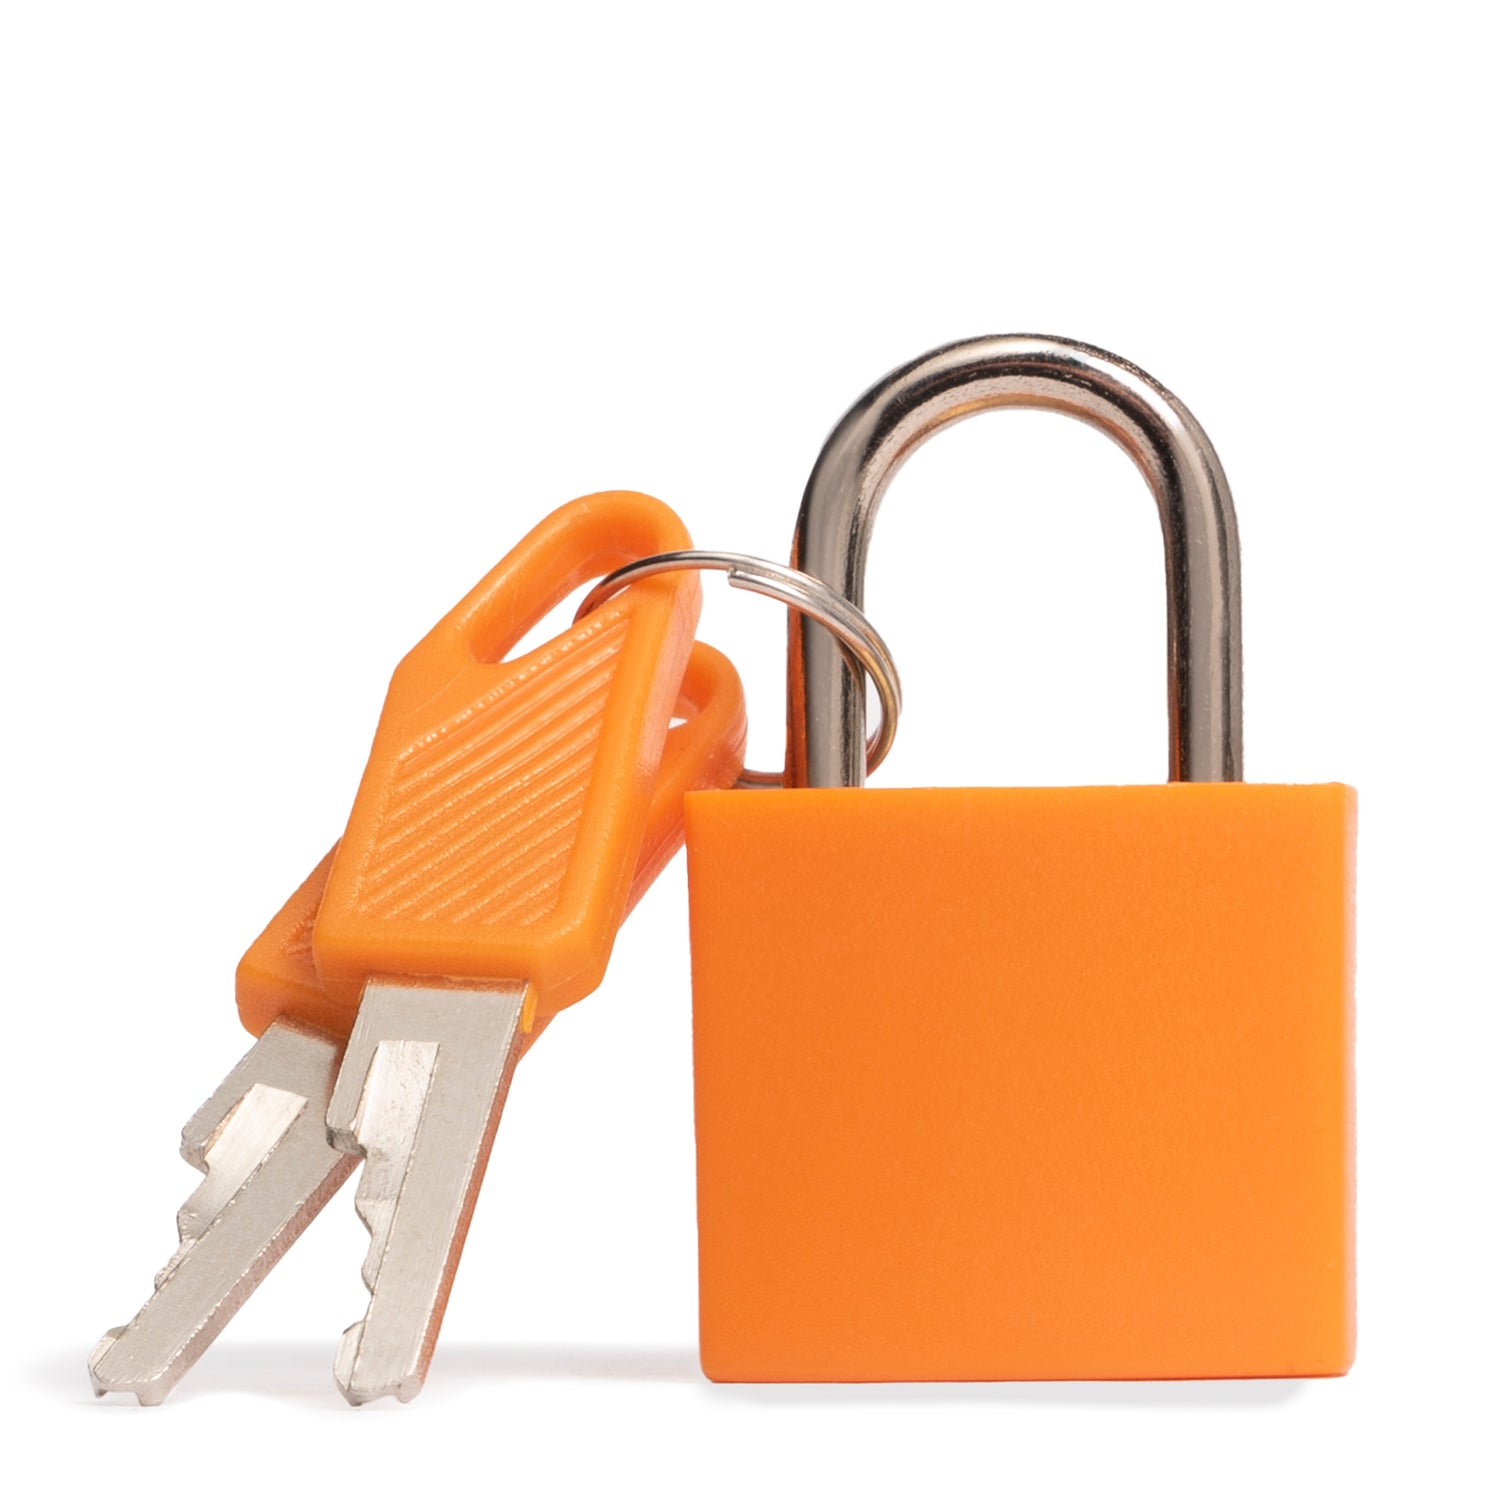 Two orange keys leaning on a orange lock designed by tracker showing its ABS texture and shiny metal